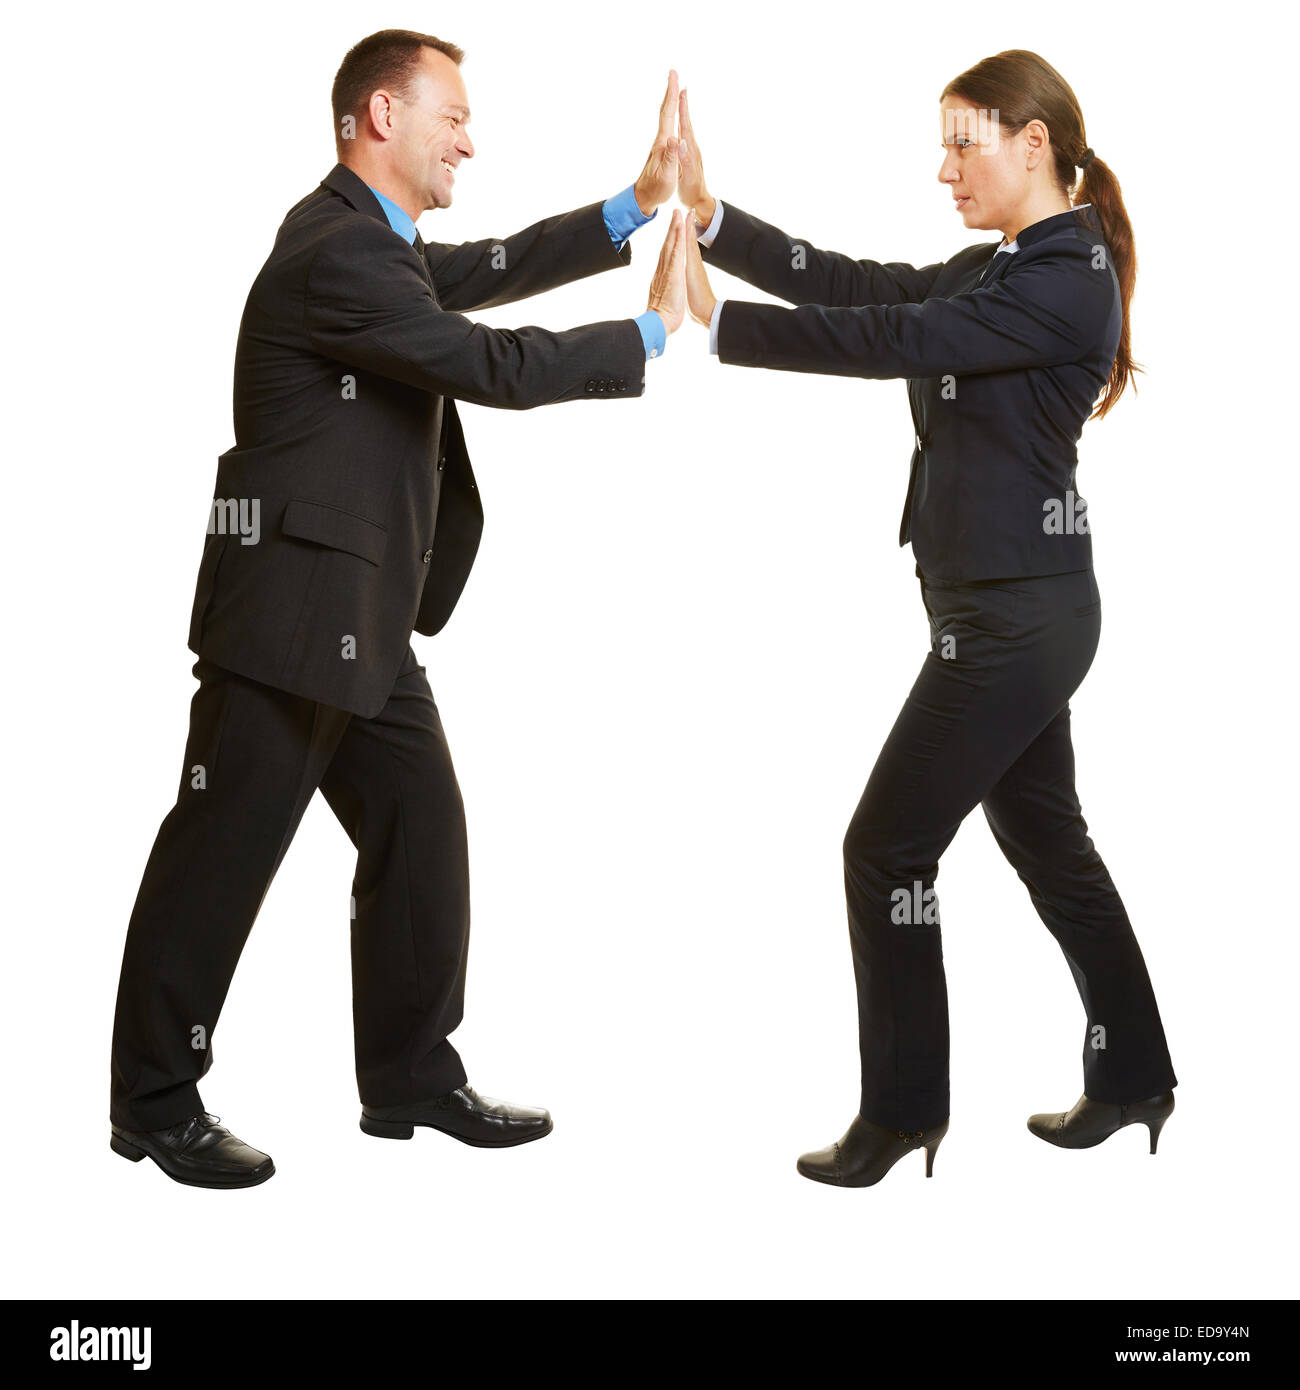 Pushing Against Each Other Cut Out Stock Images And Pictures Alamy